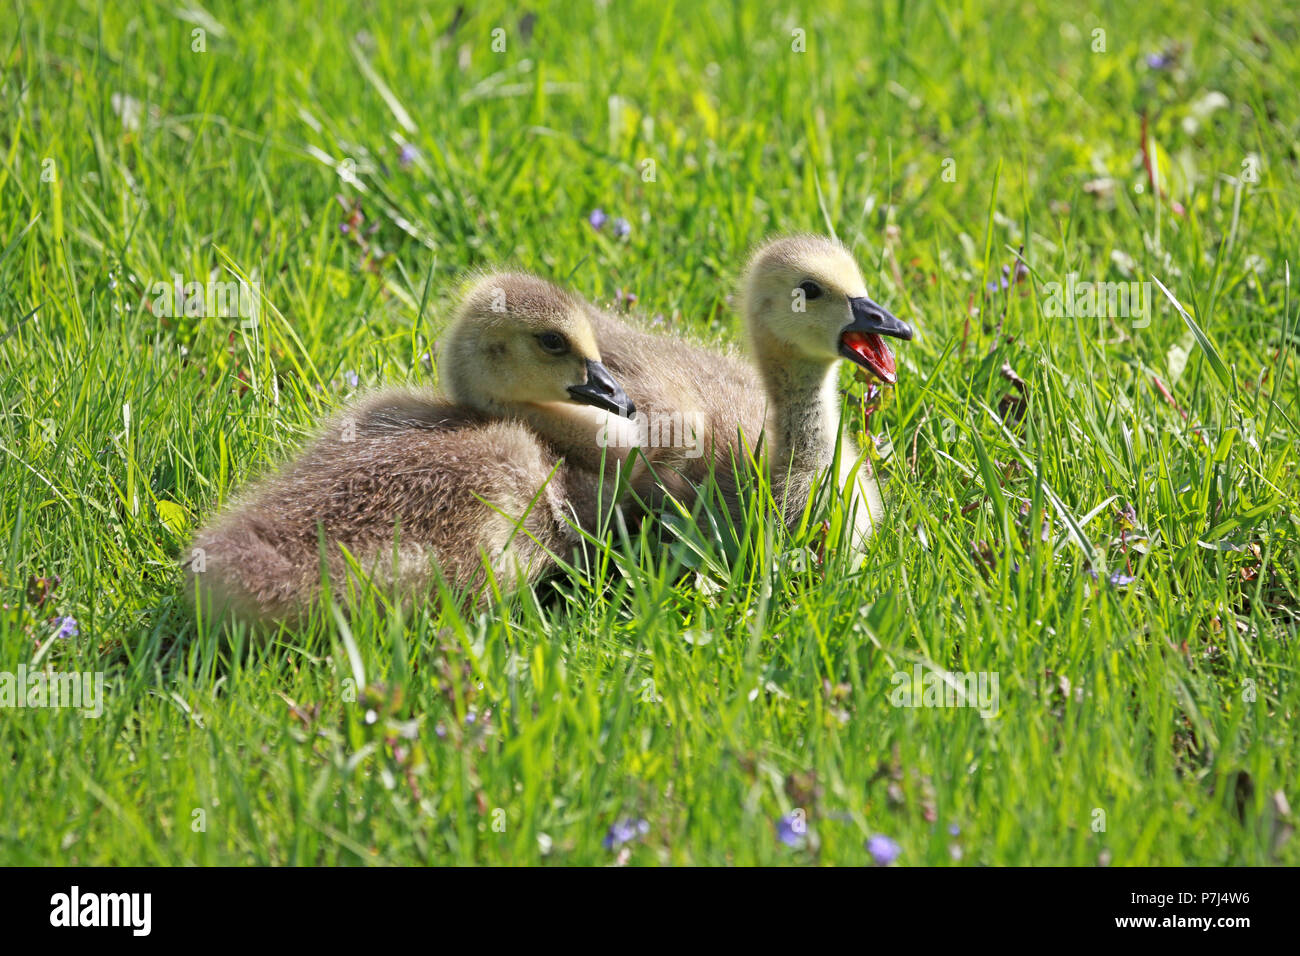 Two goslings, one with mouth open, resting in green grass patiently waiting for mama to return Stock Photo